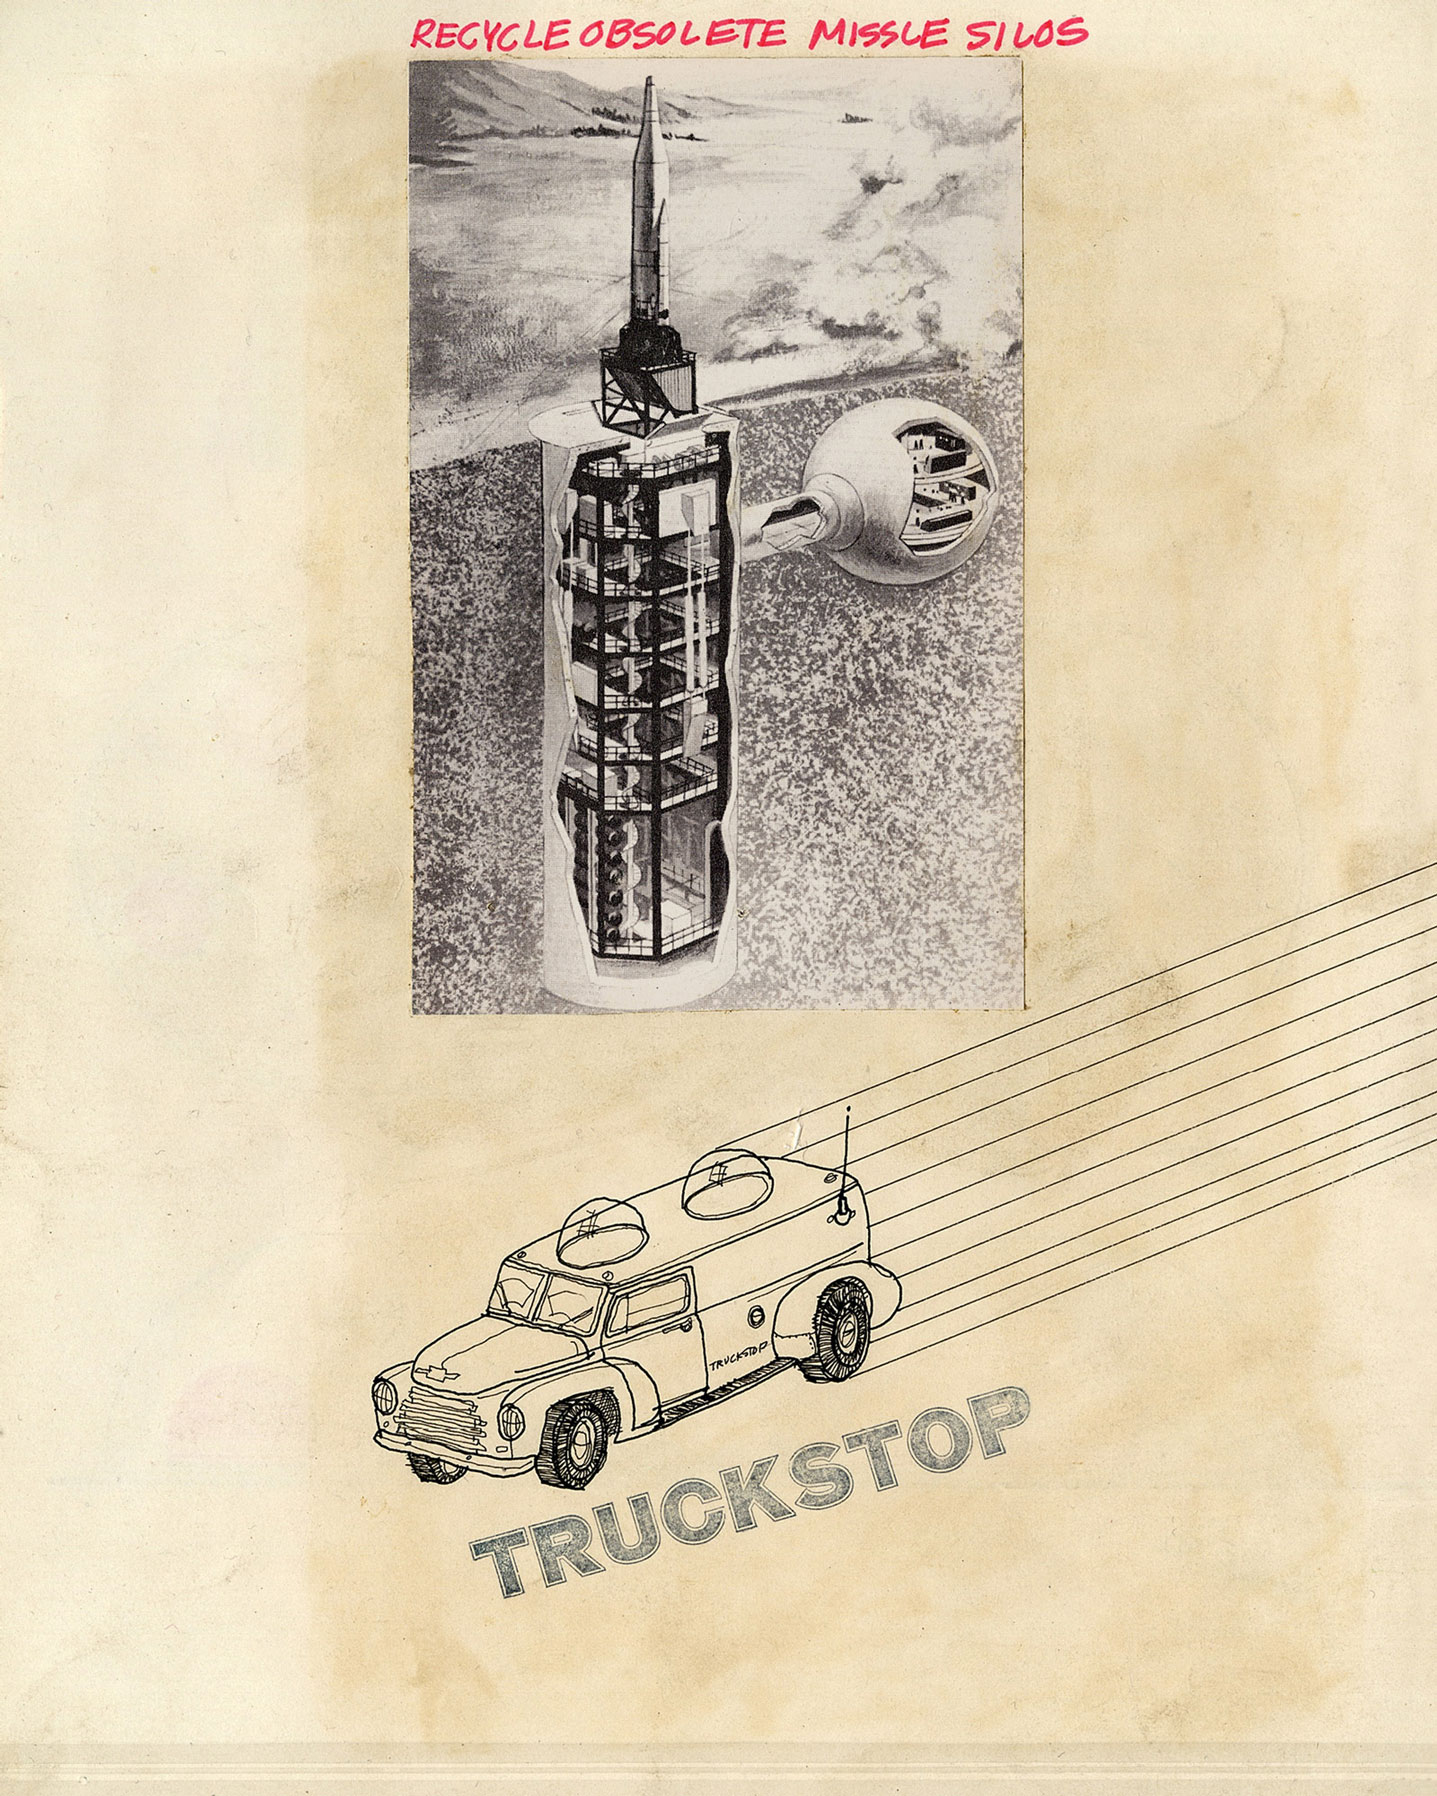 Ant Farm, Truckstop Network drawing, ca. 1971. From a collection of page mock-ups for presentation booklet. Image courtesy Berkeley Art Museum, selected from the exhibition Ant Farm:Radical Hardware curated by Felicity Scott and Mark Wasiuta at the Arthur Ross Architecture Gallery, GSAPP Columbia University.